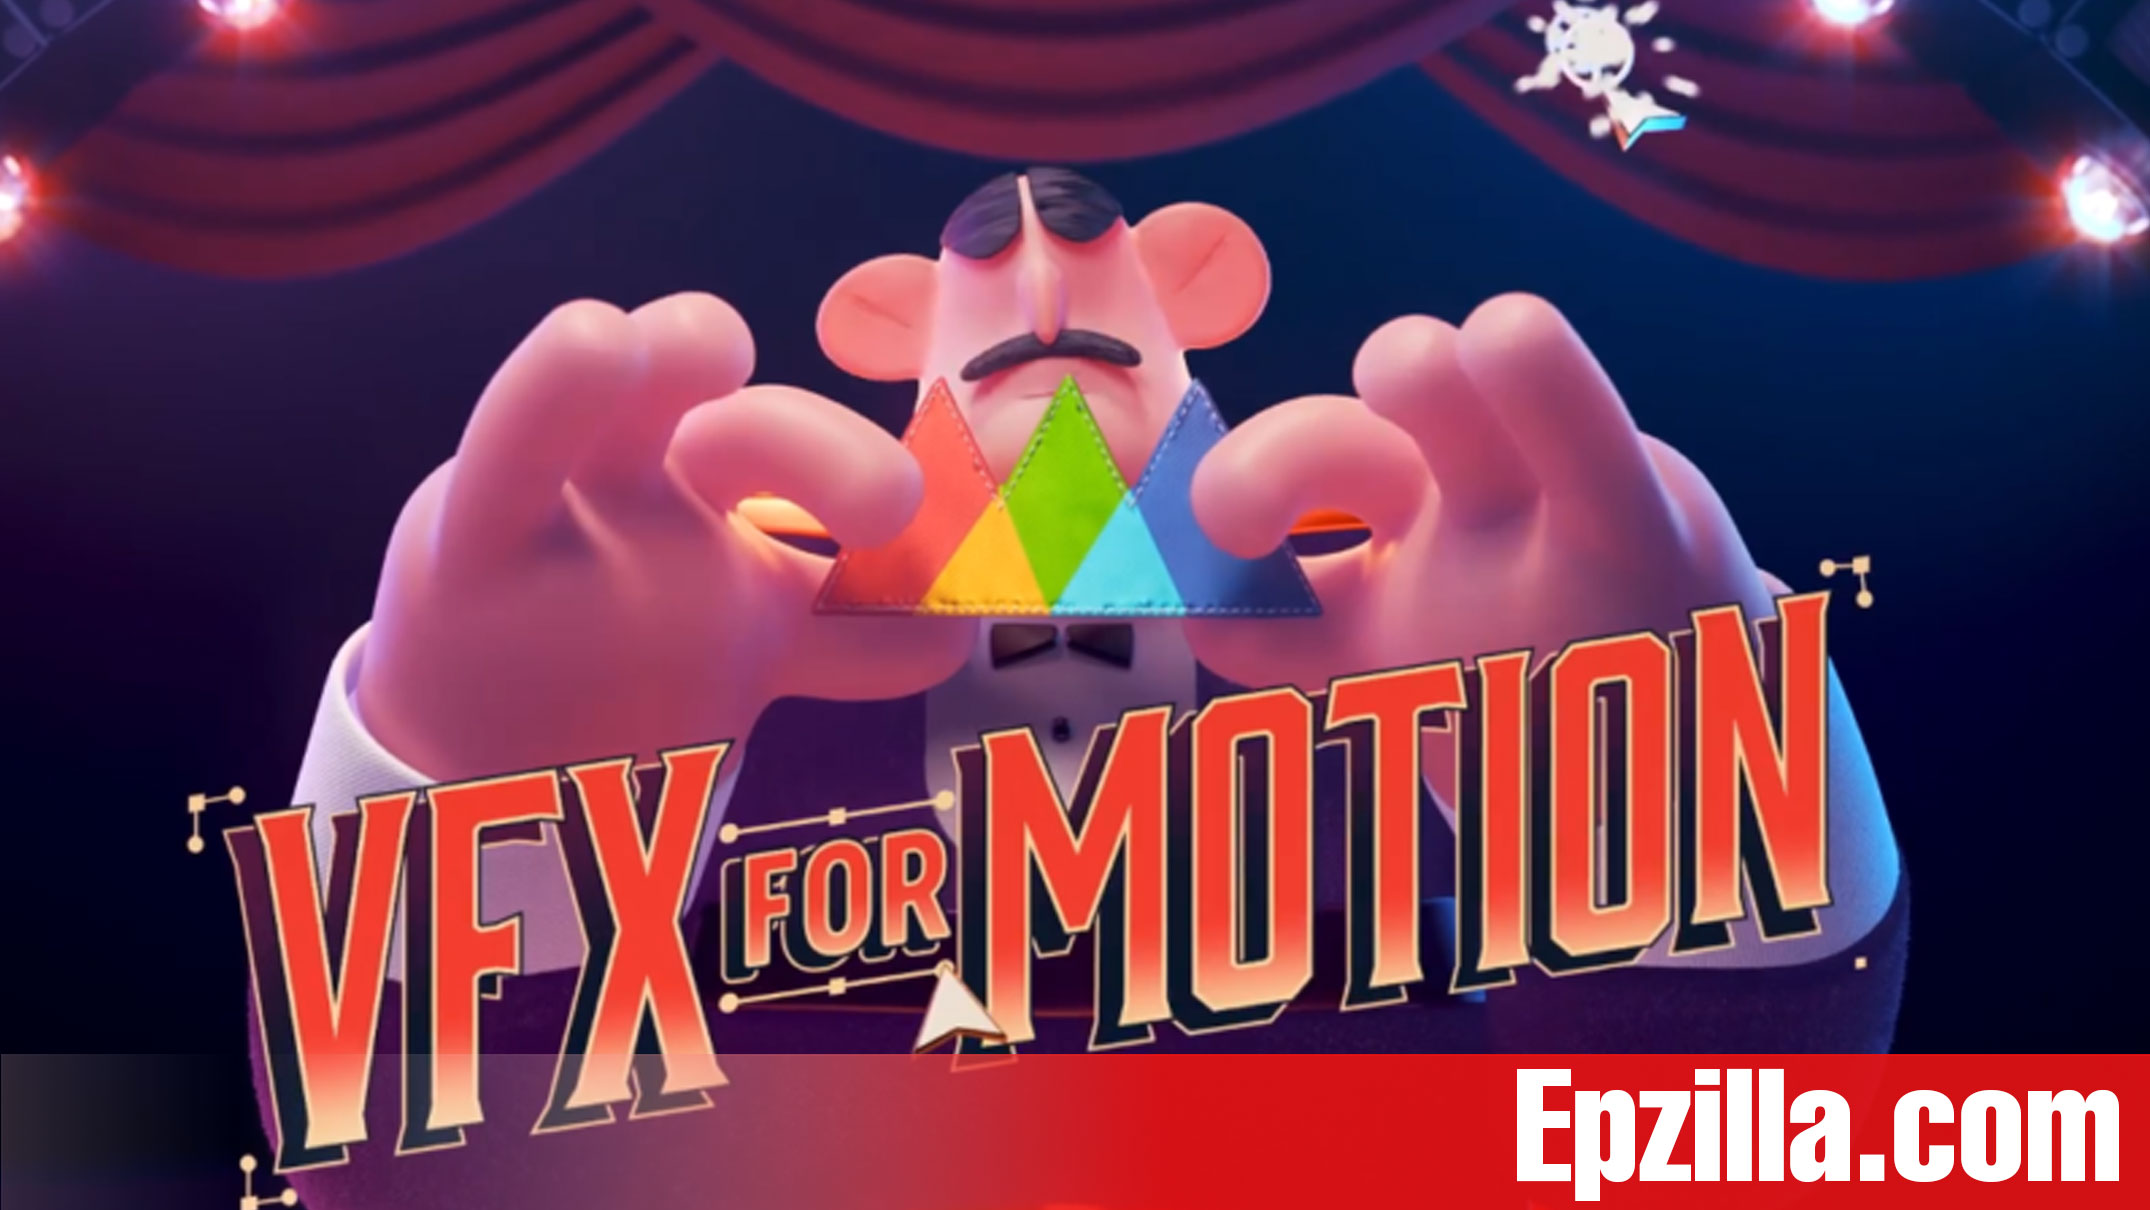 School-of-Motion-VFX-for-Motion-Free-Download-Epzilla.com